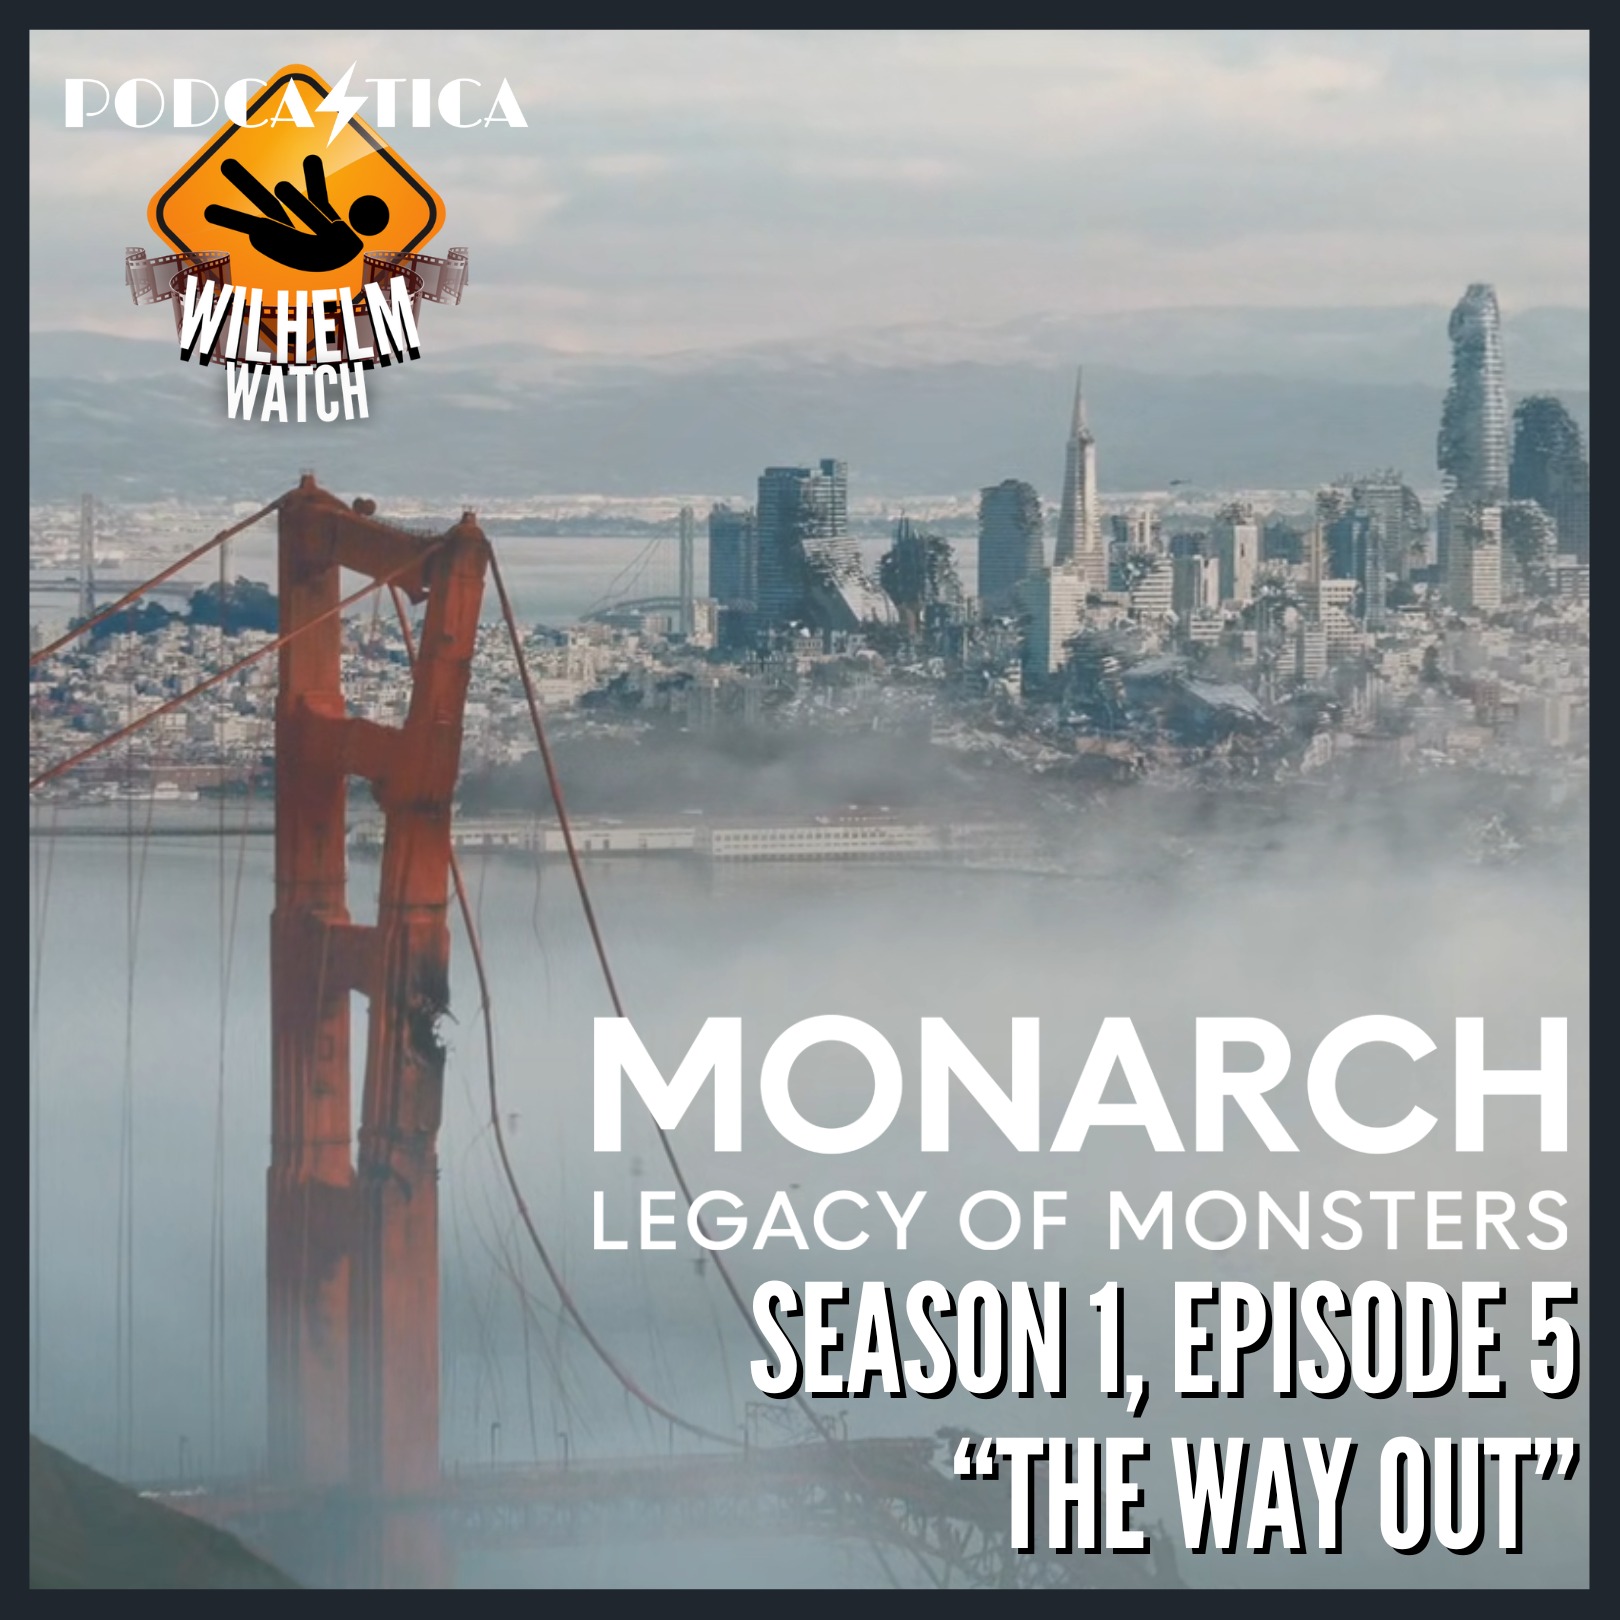 WILHELM WATCH / HOUSE PODCASTICA - Monarch: Legacy of Monsters S01E05 